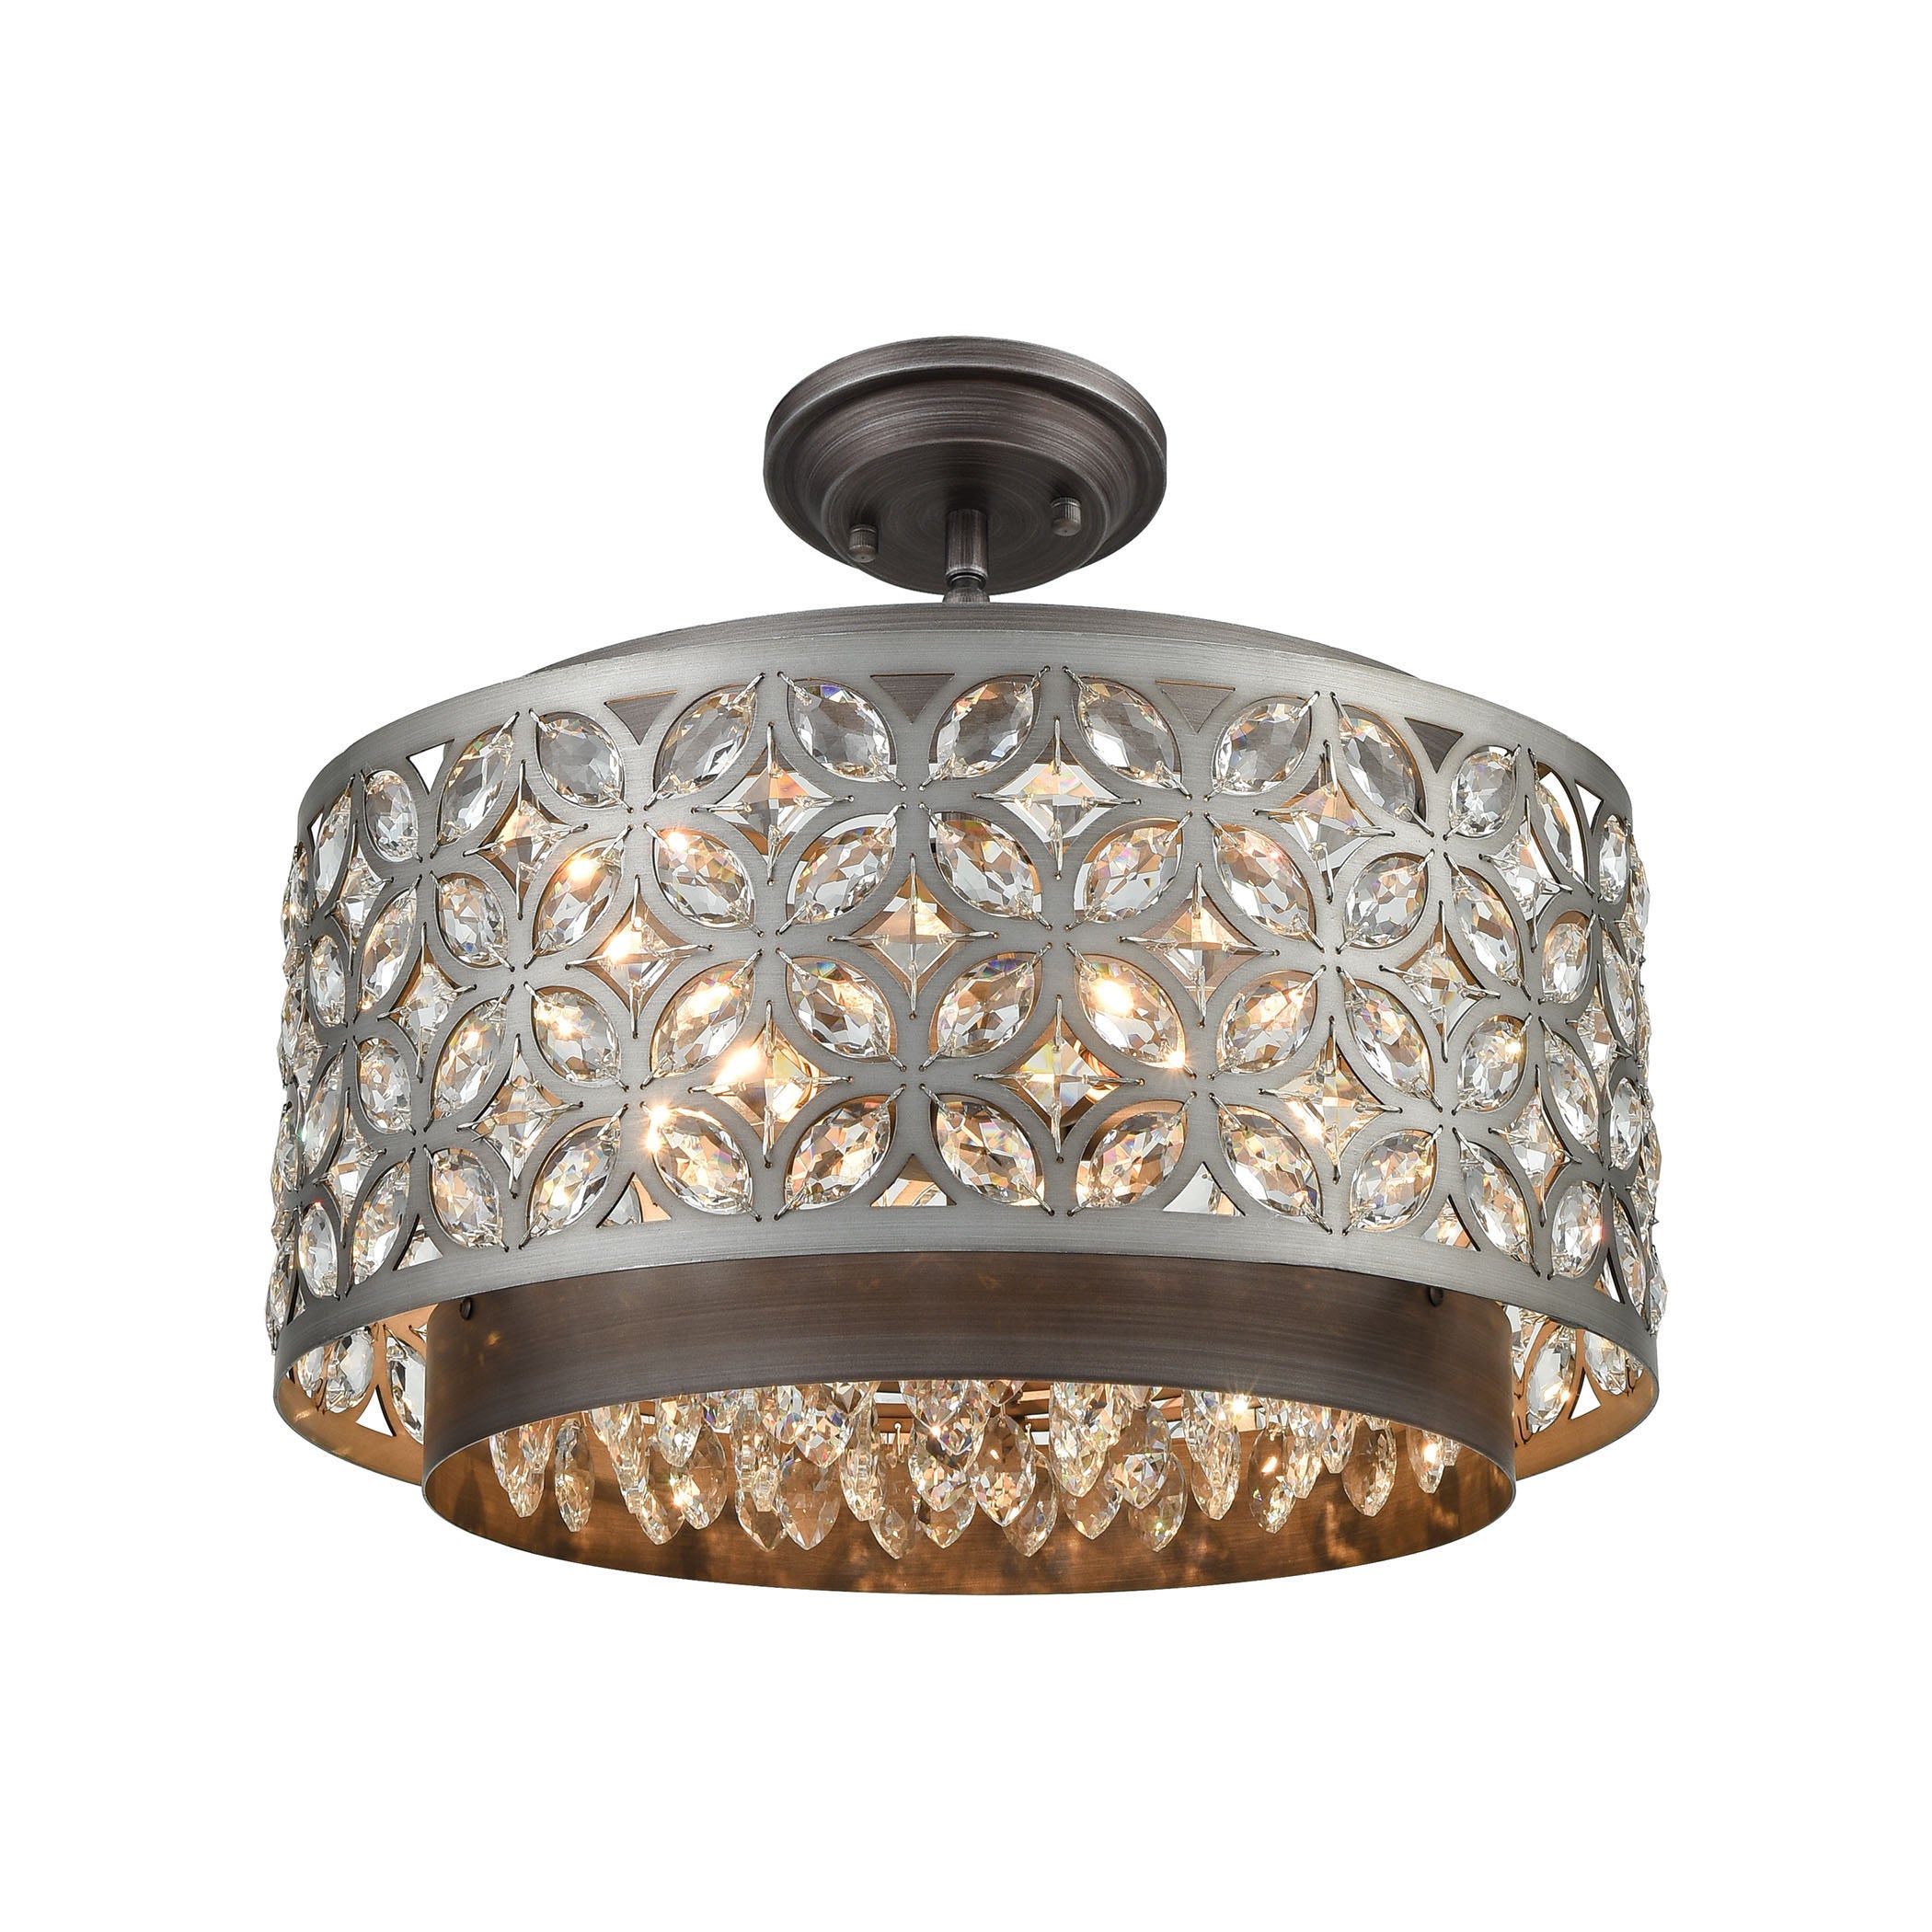 ELK Lighting 12163/5 Rosslyn 5-Light Chandelier in Weathered Zinc and Matte Silver with Crystal and Metalwork Shade